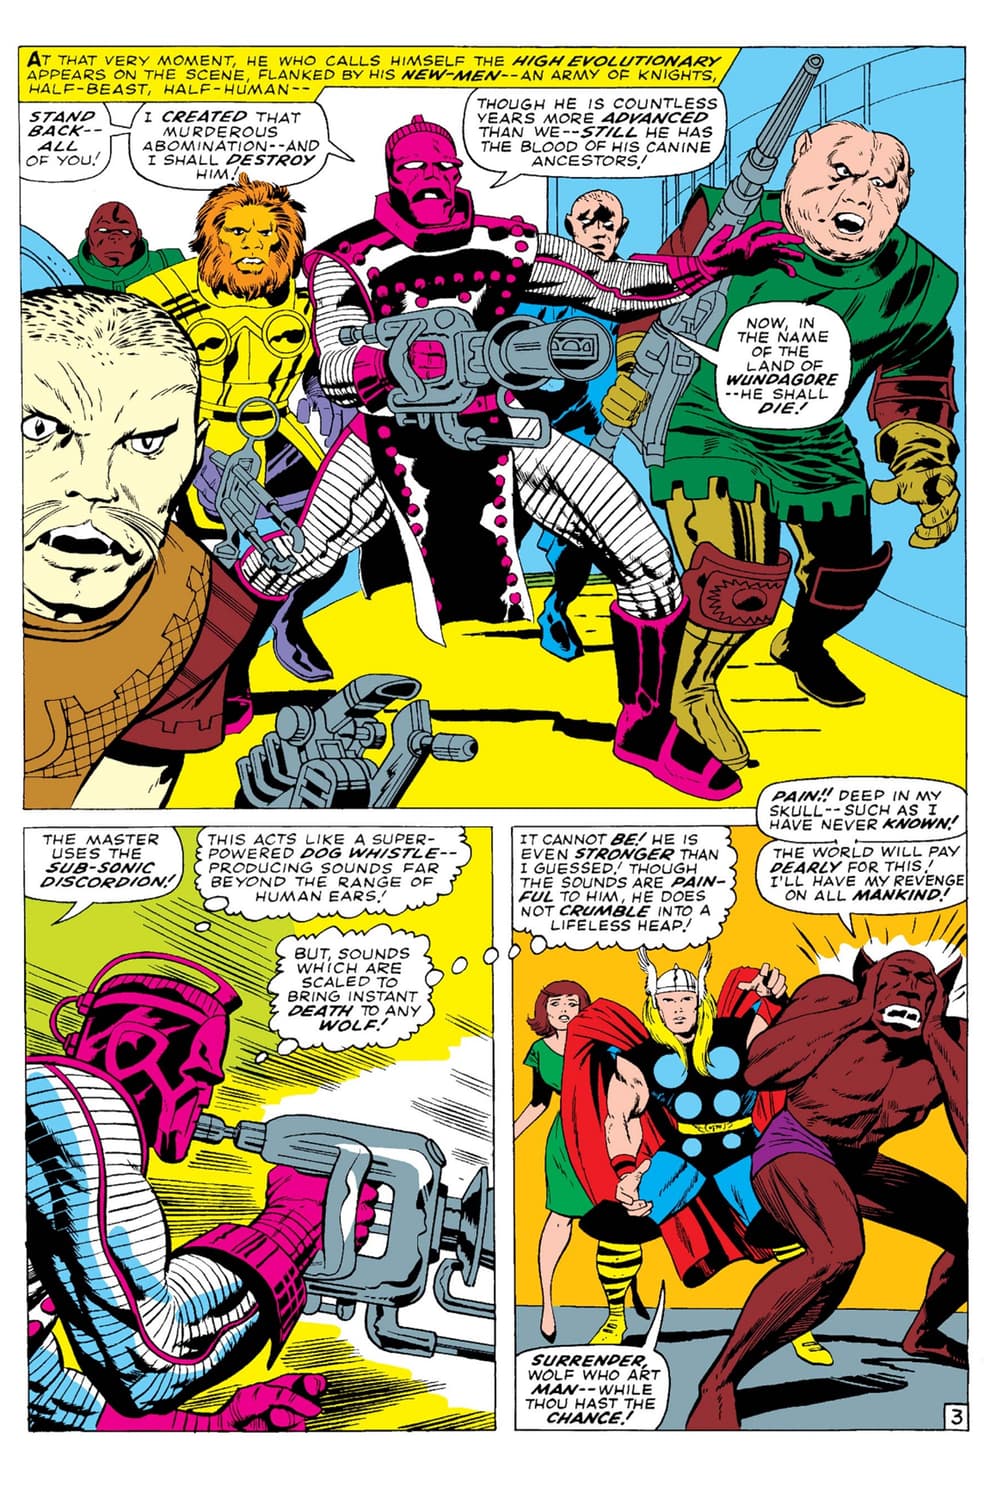 THOR (1966) #134 page by Jack Kirby and Vince Colletta